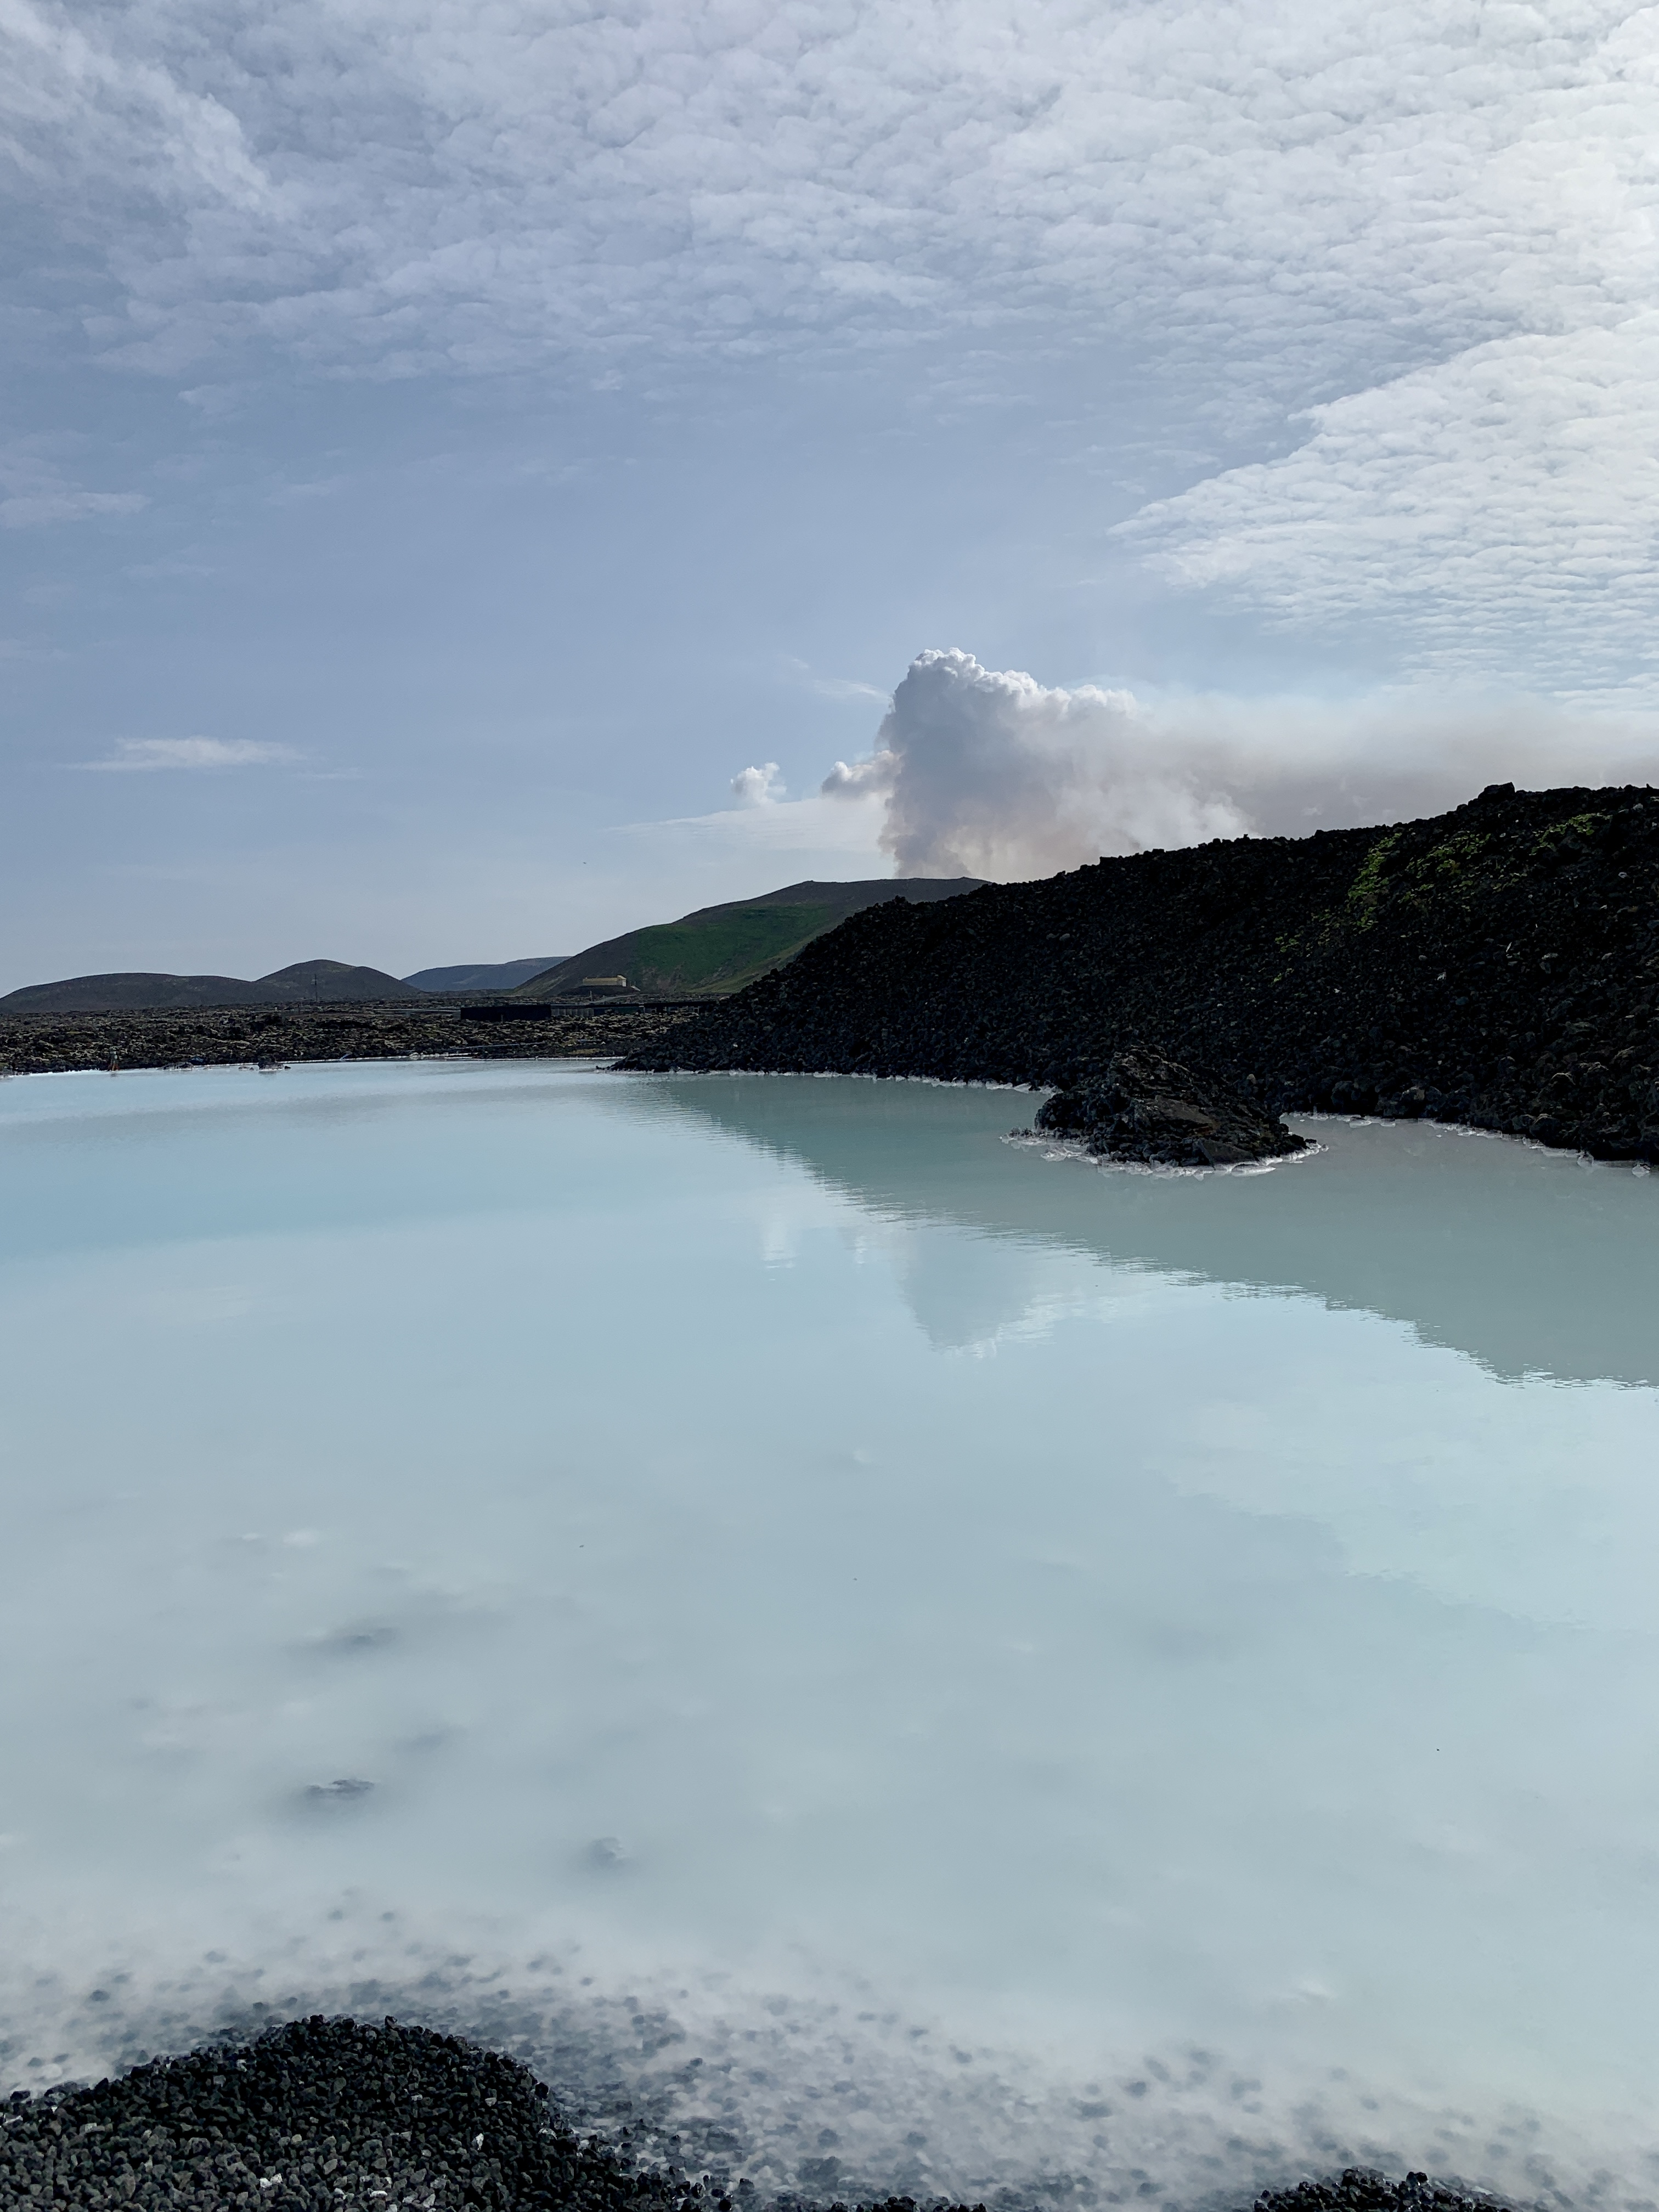 View of the smoking volcano in Iceland from the Blue Lagoon